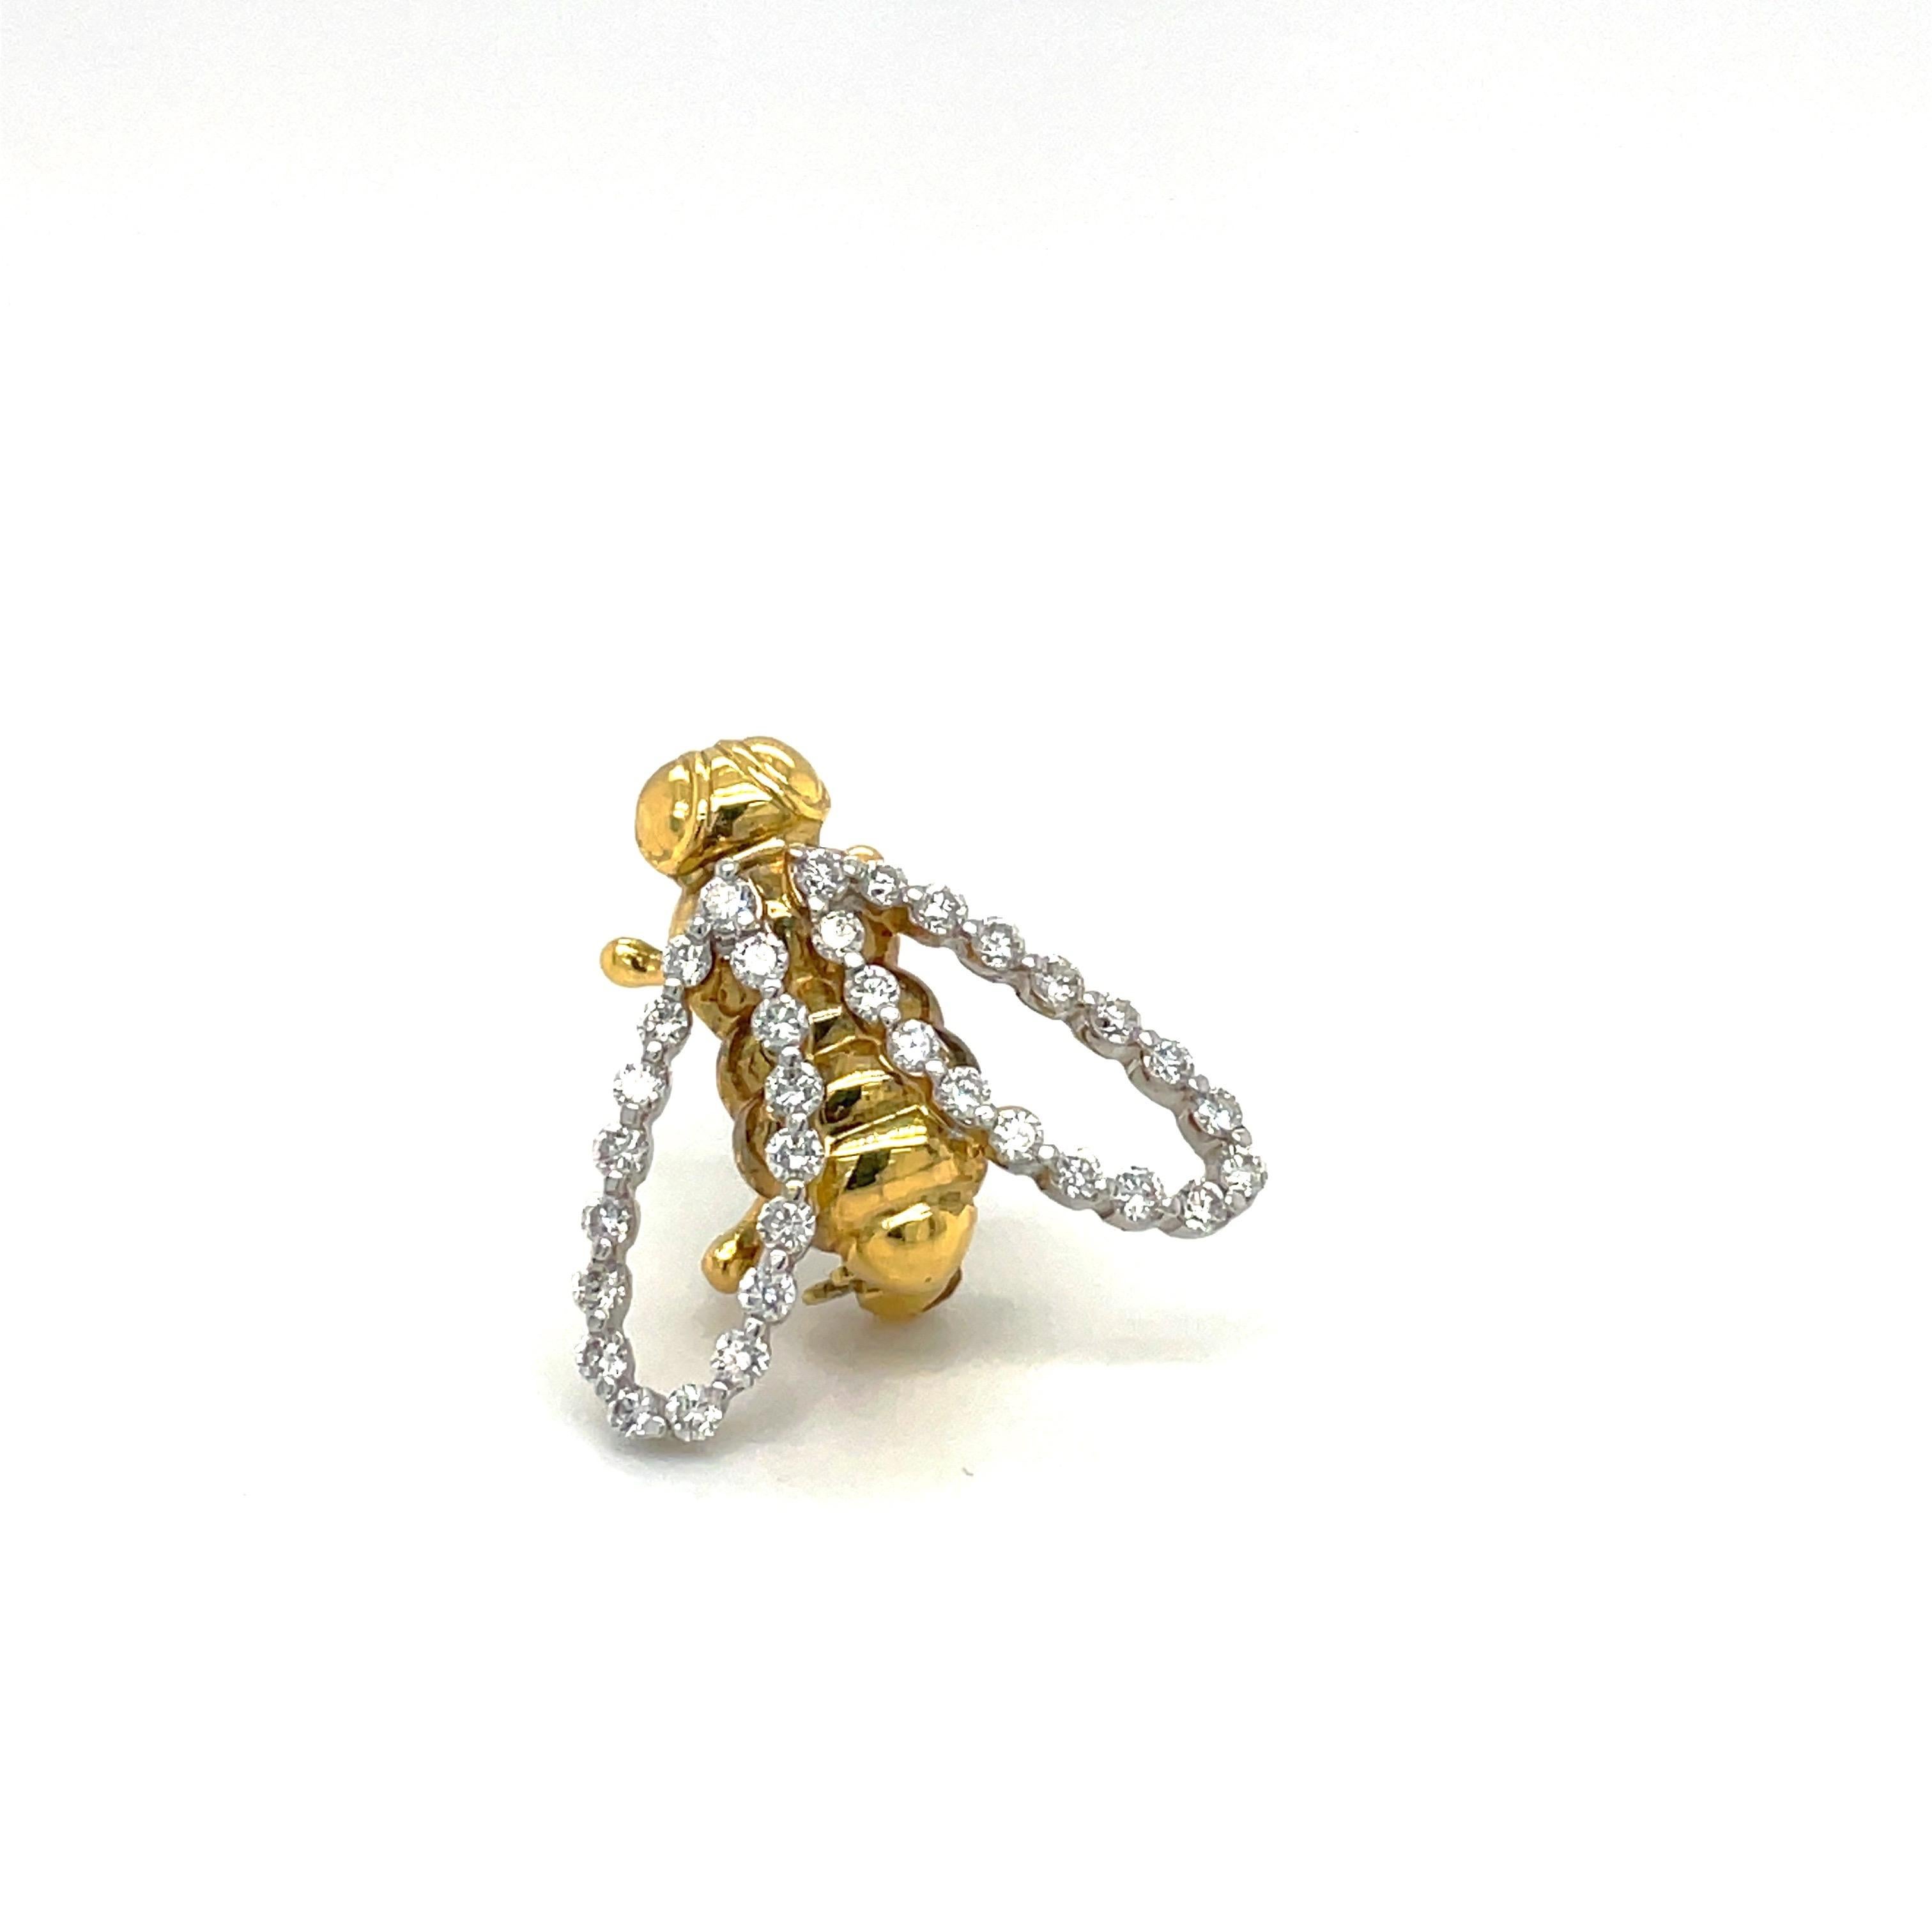 A lovely designed 18 karat yellow and white gold bee brooch. The bee is crafted in a high polished yellow gold. The  white gold wings are set with round brilliant diamonds. The setting is a 2 prong setting ,giving a seamless look. The bee measures